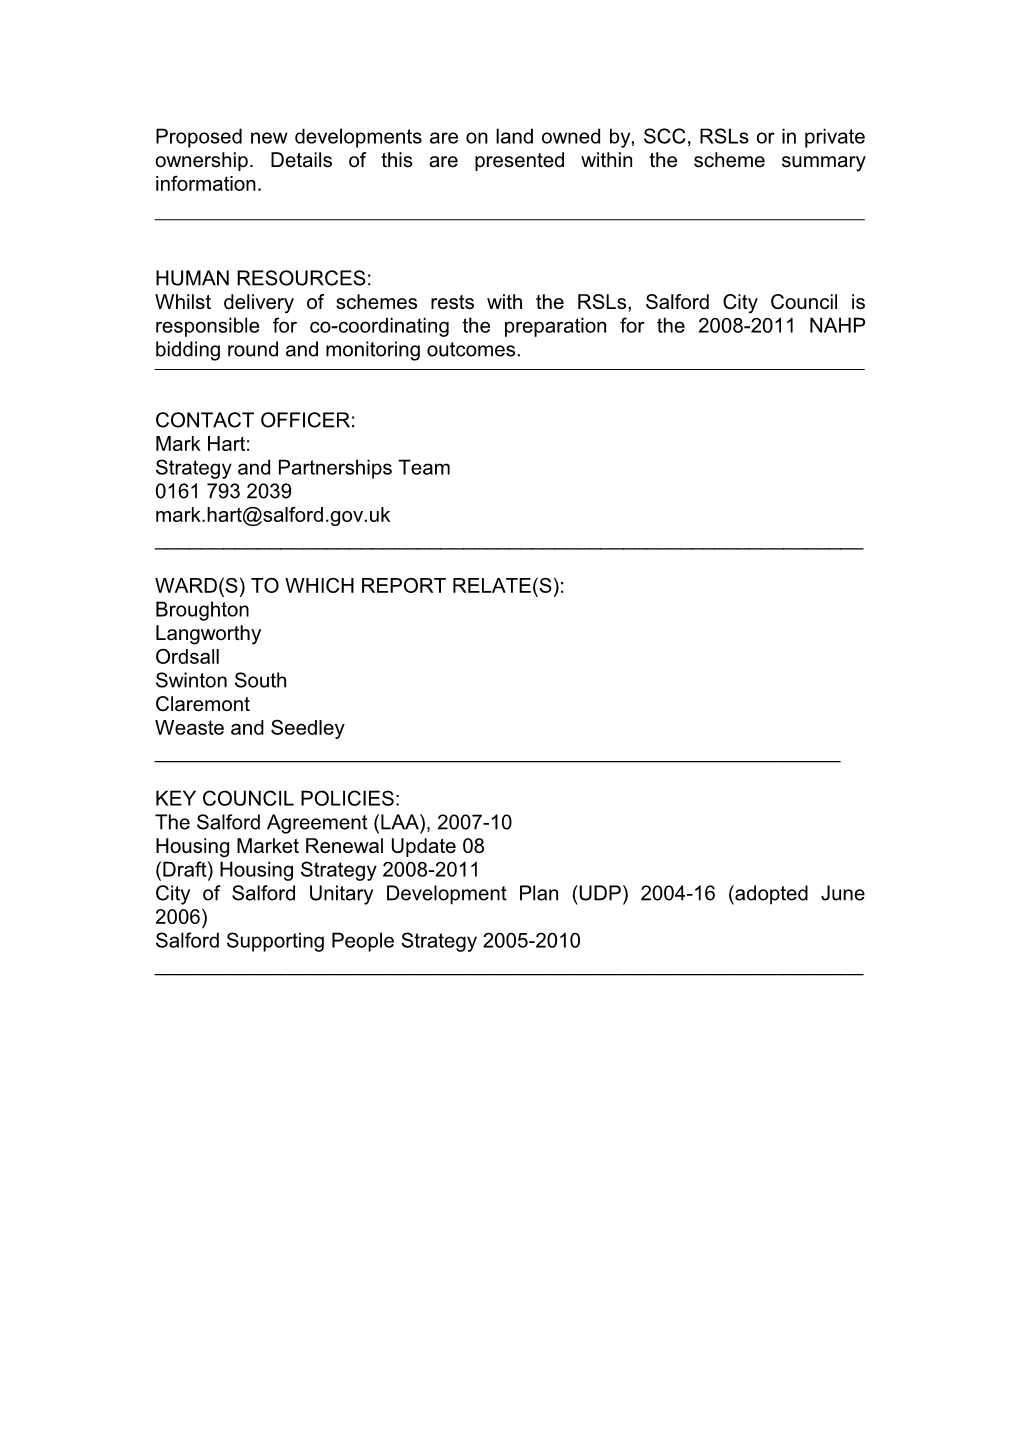 Report of the Deputy Director of Housing and Planning